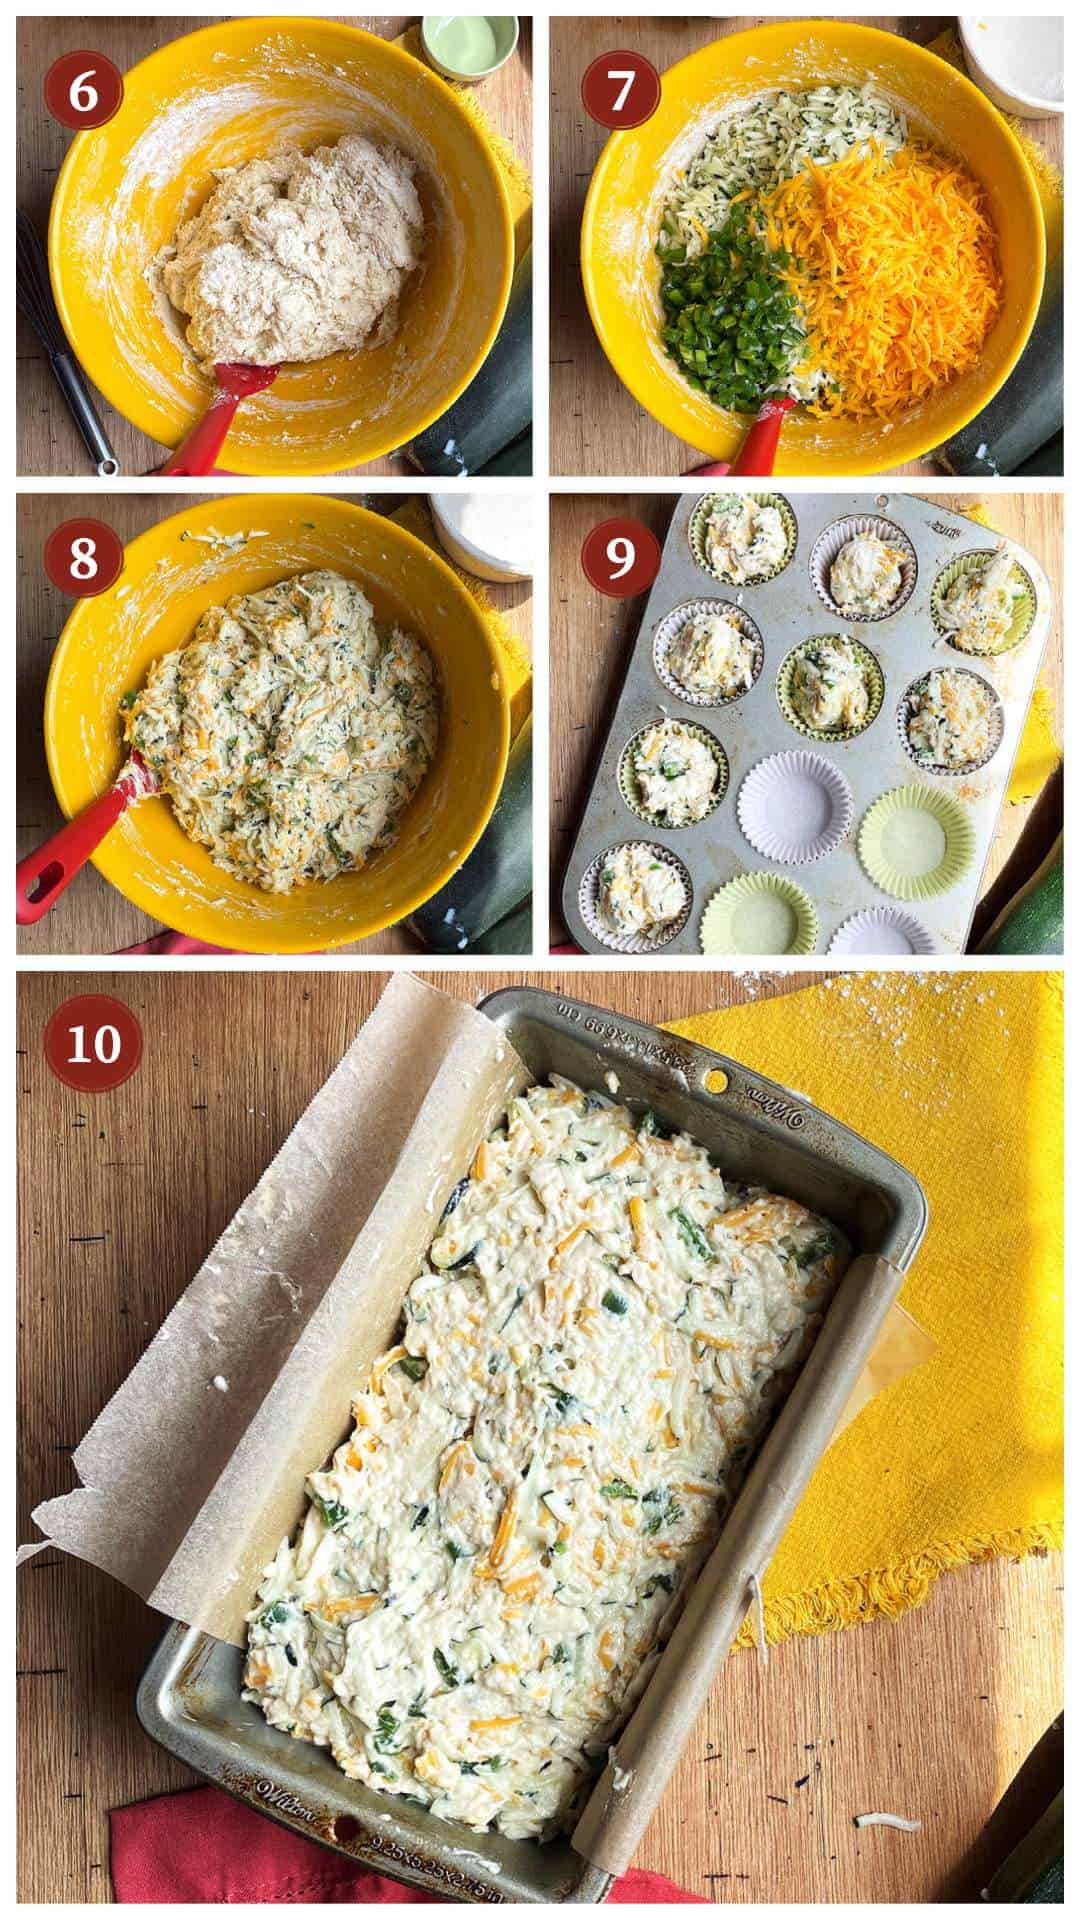 A collage of images showing how to make savory zucchini muffins and bread, steps 6 - 10.